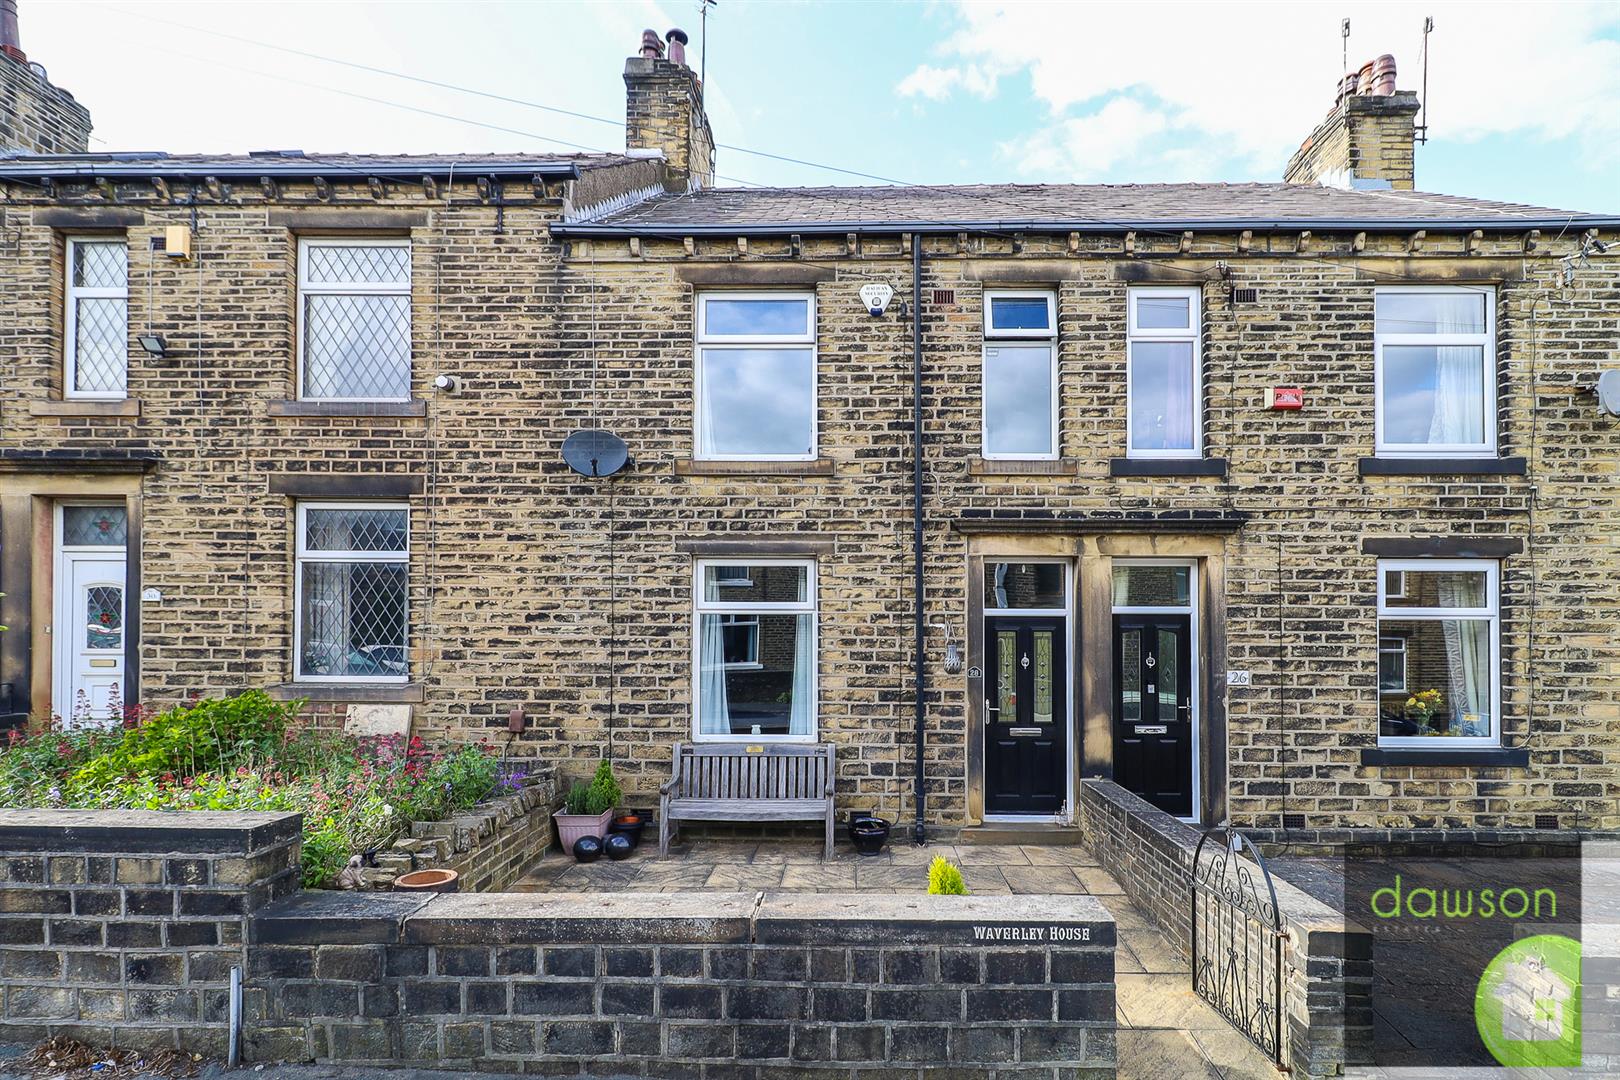 3 bed terraced house for sale in Waverley Road, Elland, HX5 